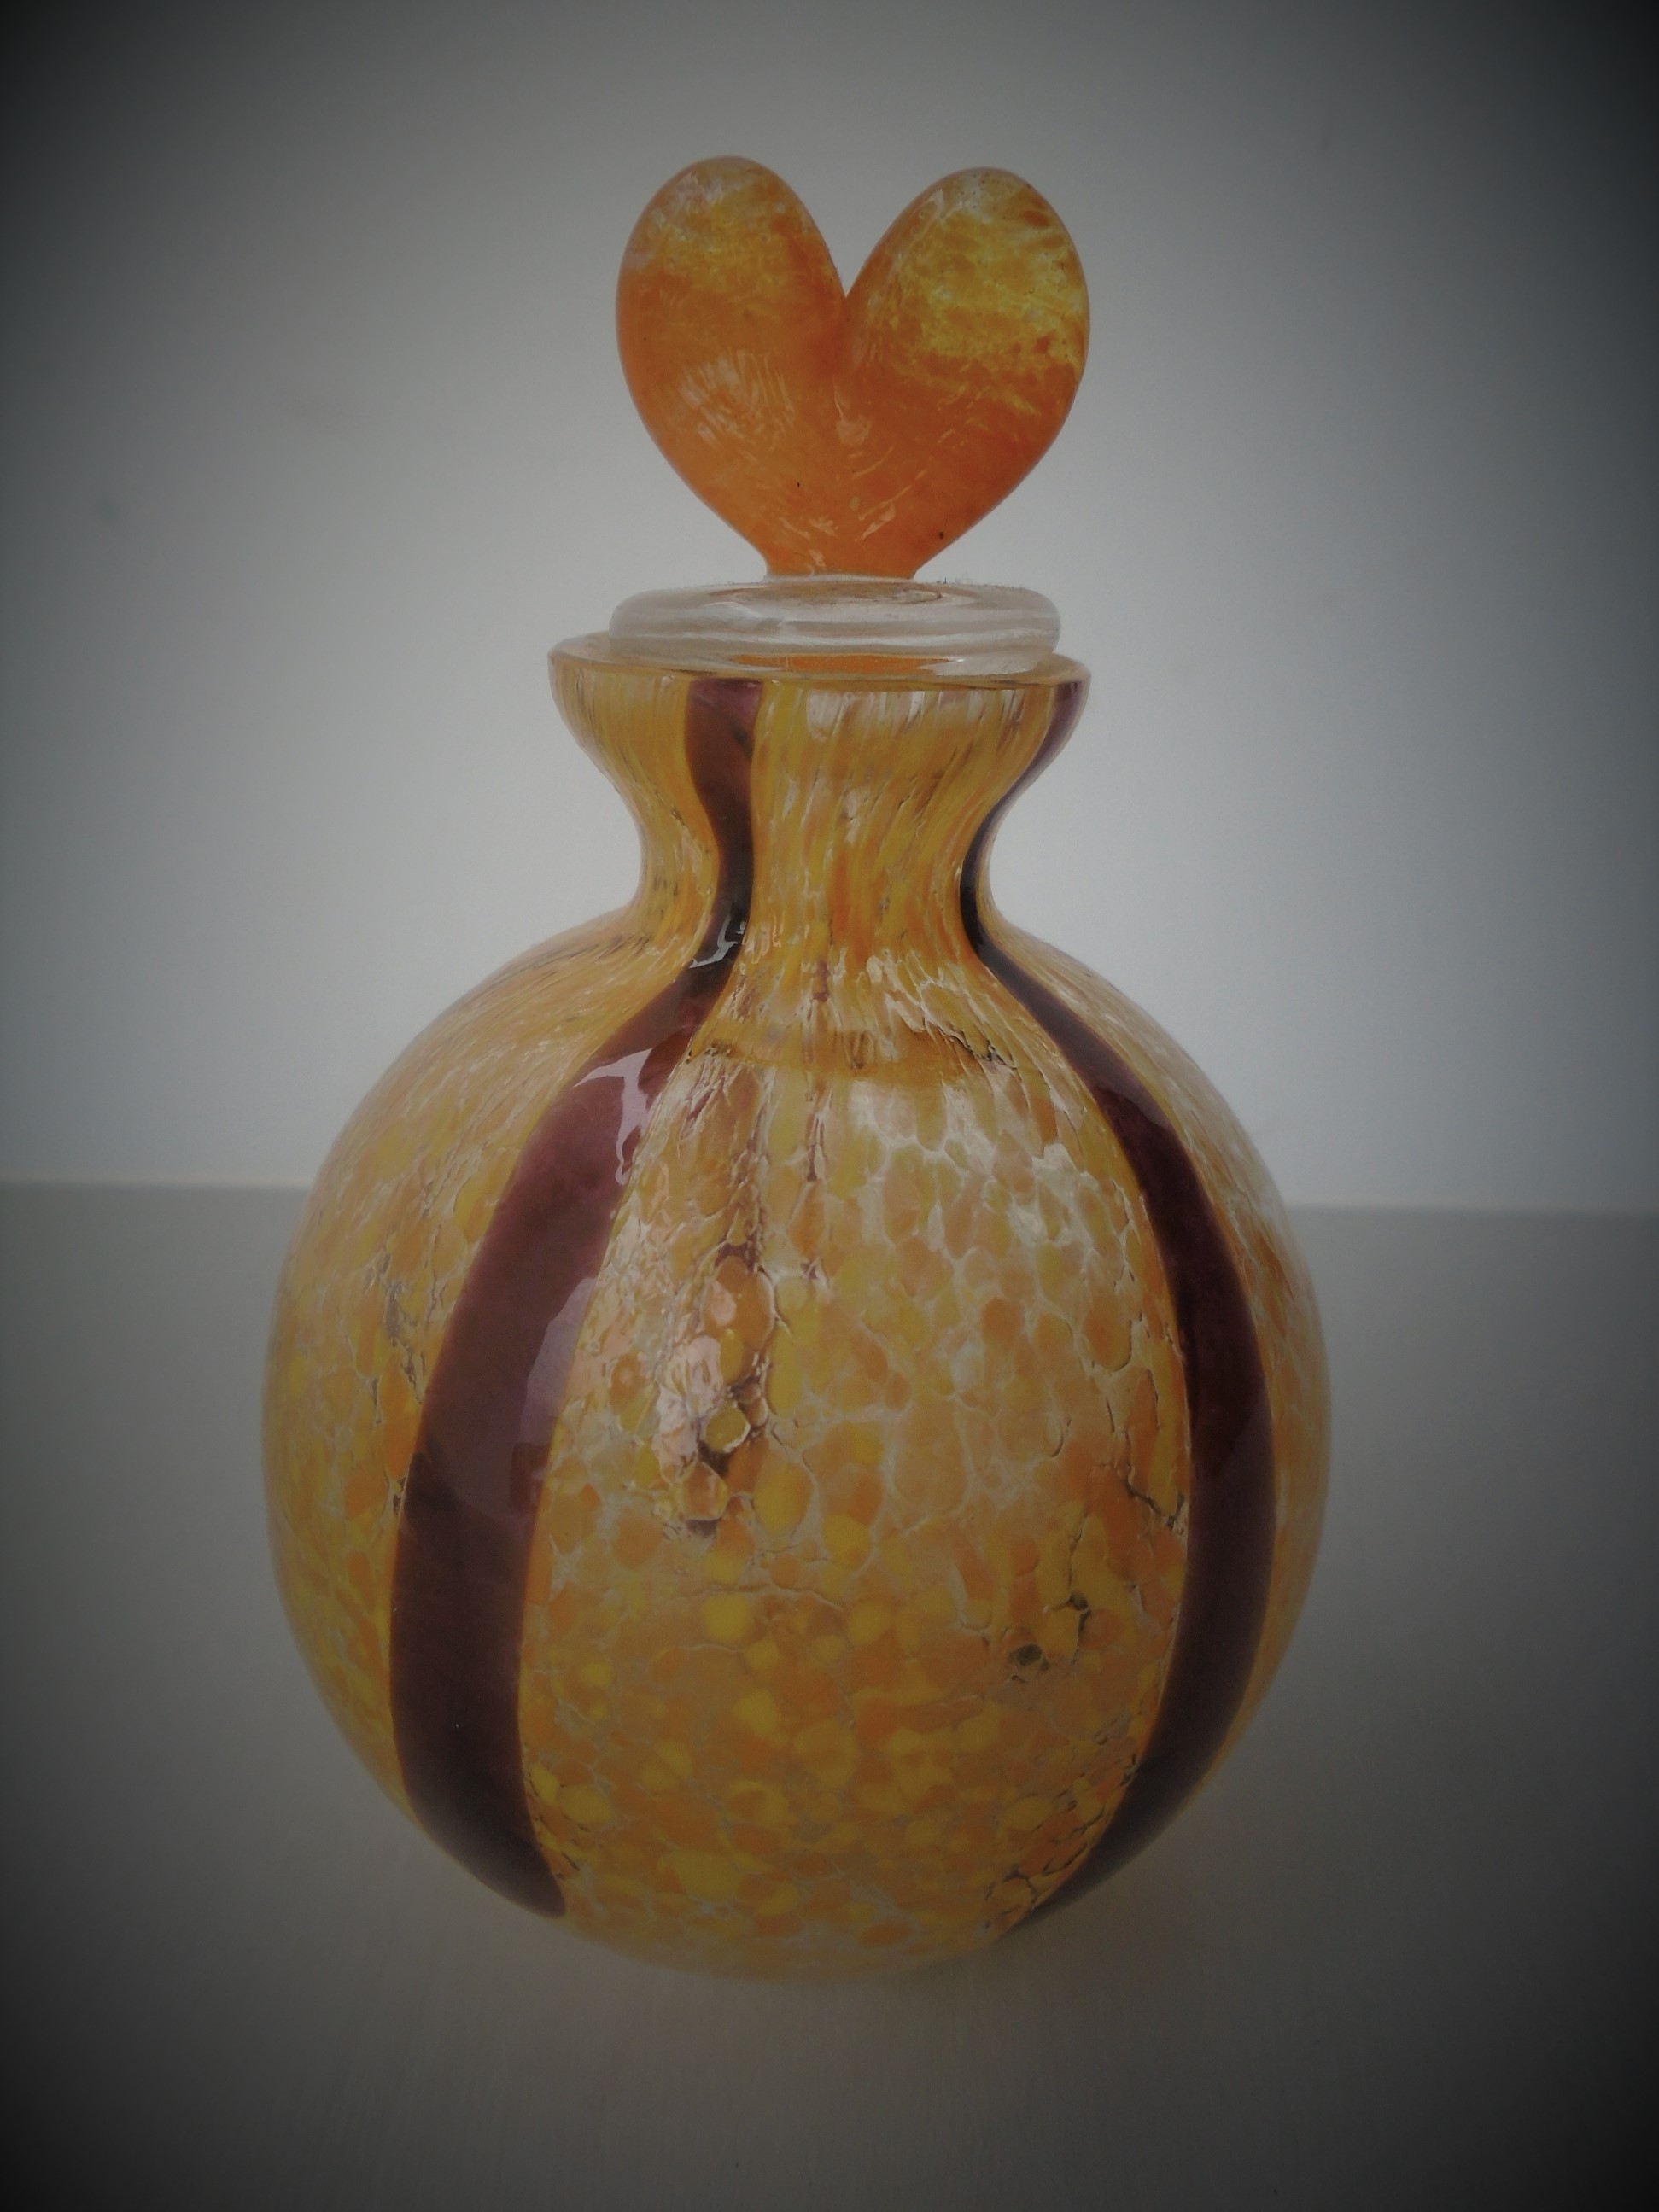 Offered for sale is a PRETTY GLASS PERFUME BOTTLE WITH HEART SHAPED STOPPER.